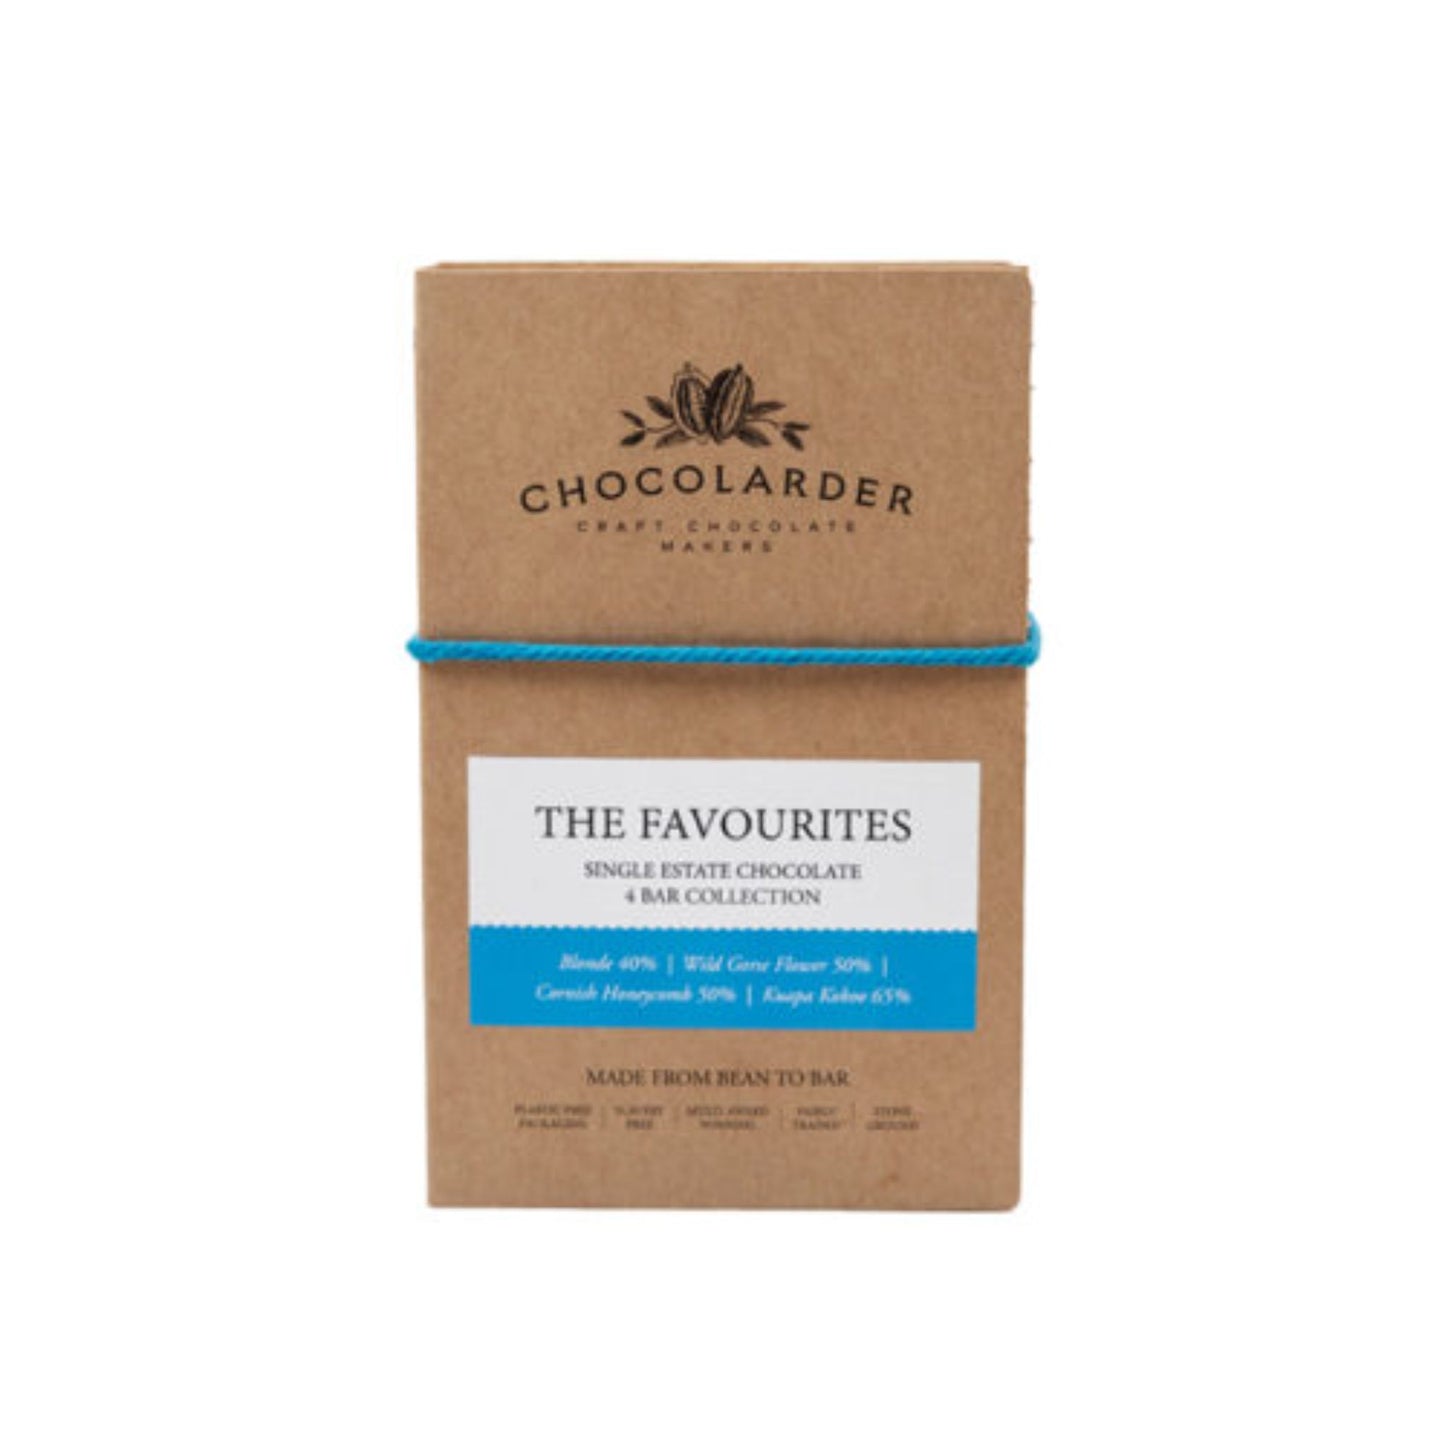 NEW! The Favourites | 4 Chocolate Bar Gift Set